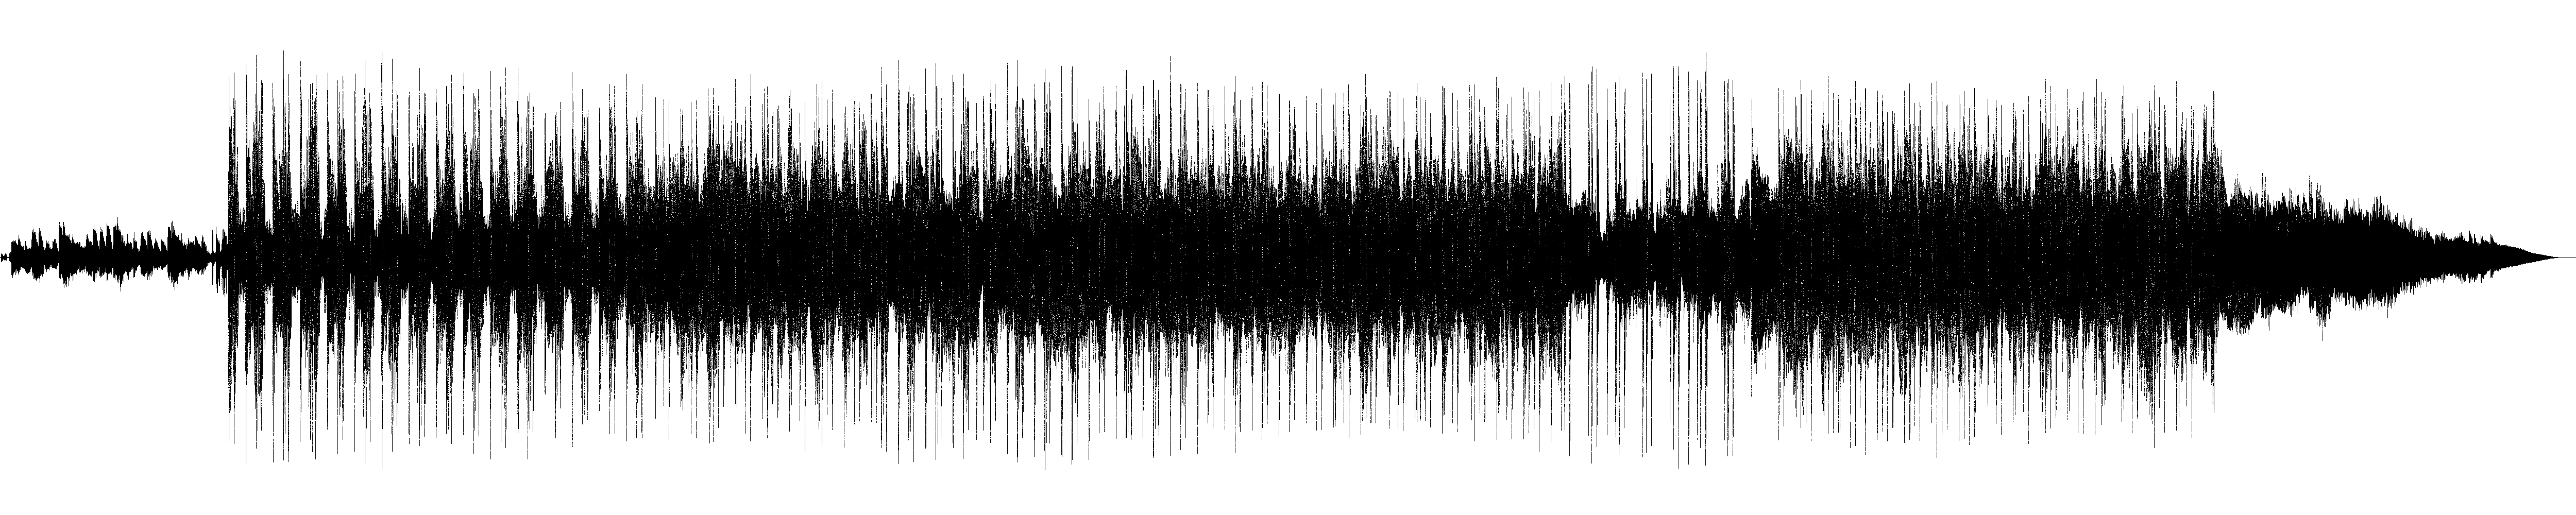 Example 1: Lowpassed Waveform of a song